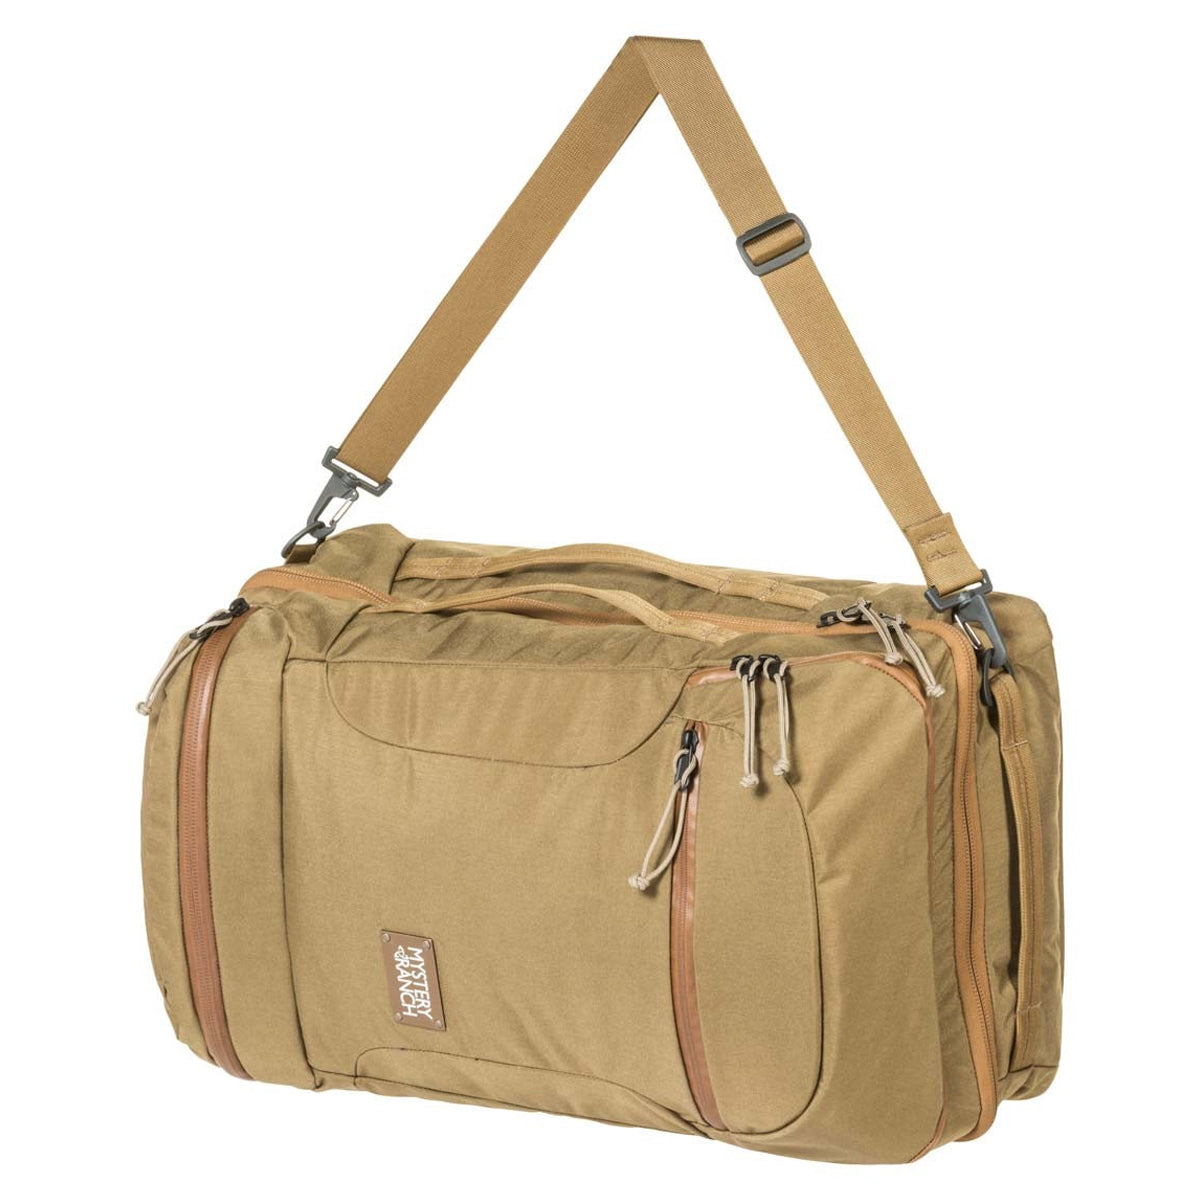 Mystery Ranch Mission Rover Duffel Bag in Mystery Ranch Mission Rover Duffel Bag by Mystery Ranch | Gear - goHUNT Shop by GOHUNT | Mystery Ranch - GOHUNT Shop